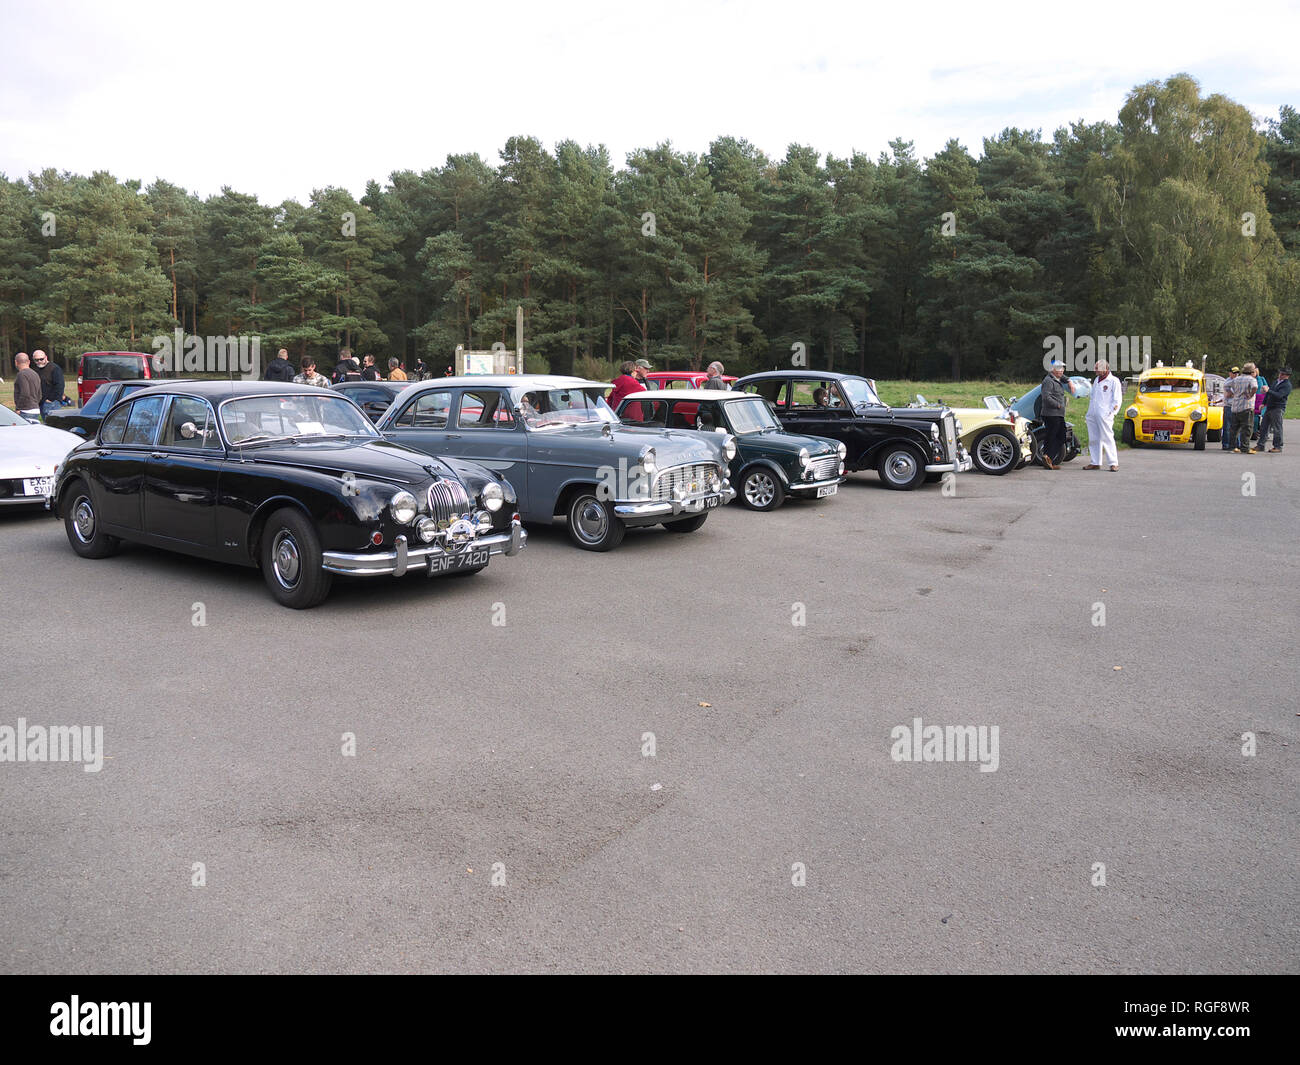 Classic cars on display at Willingham woods Stock Photo